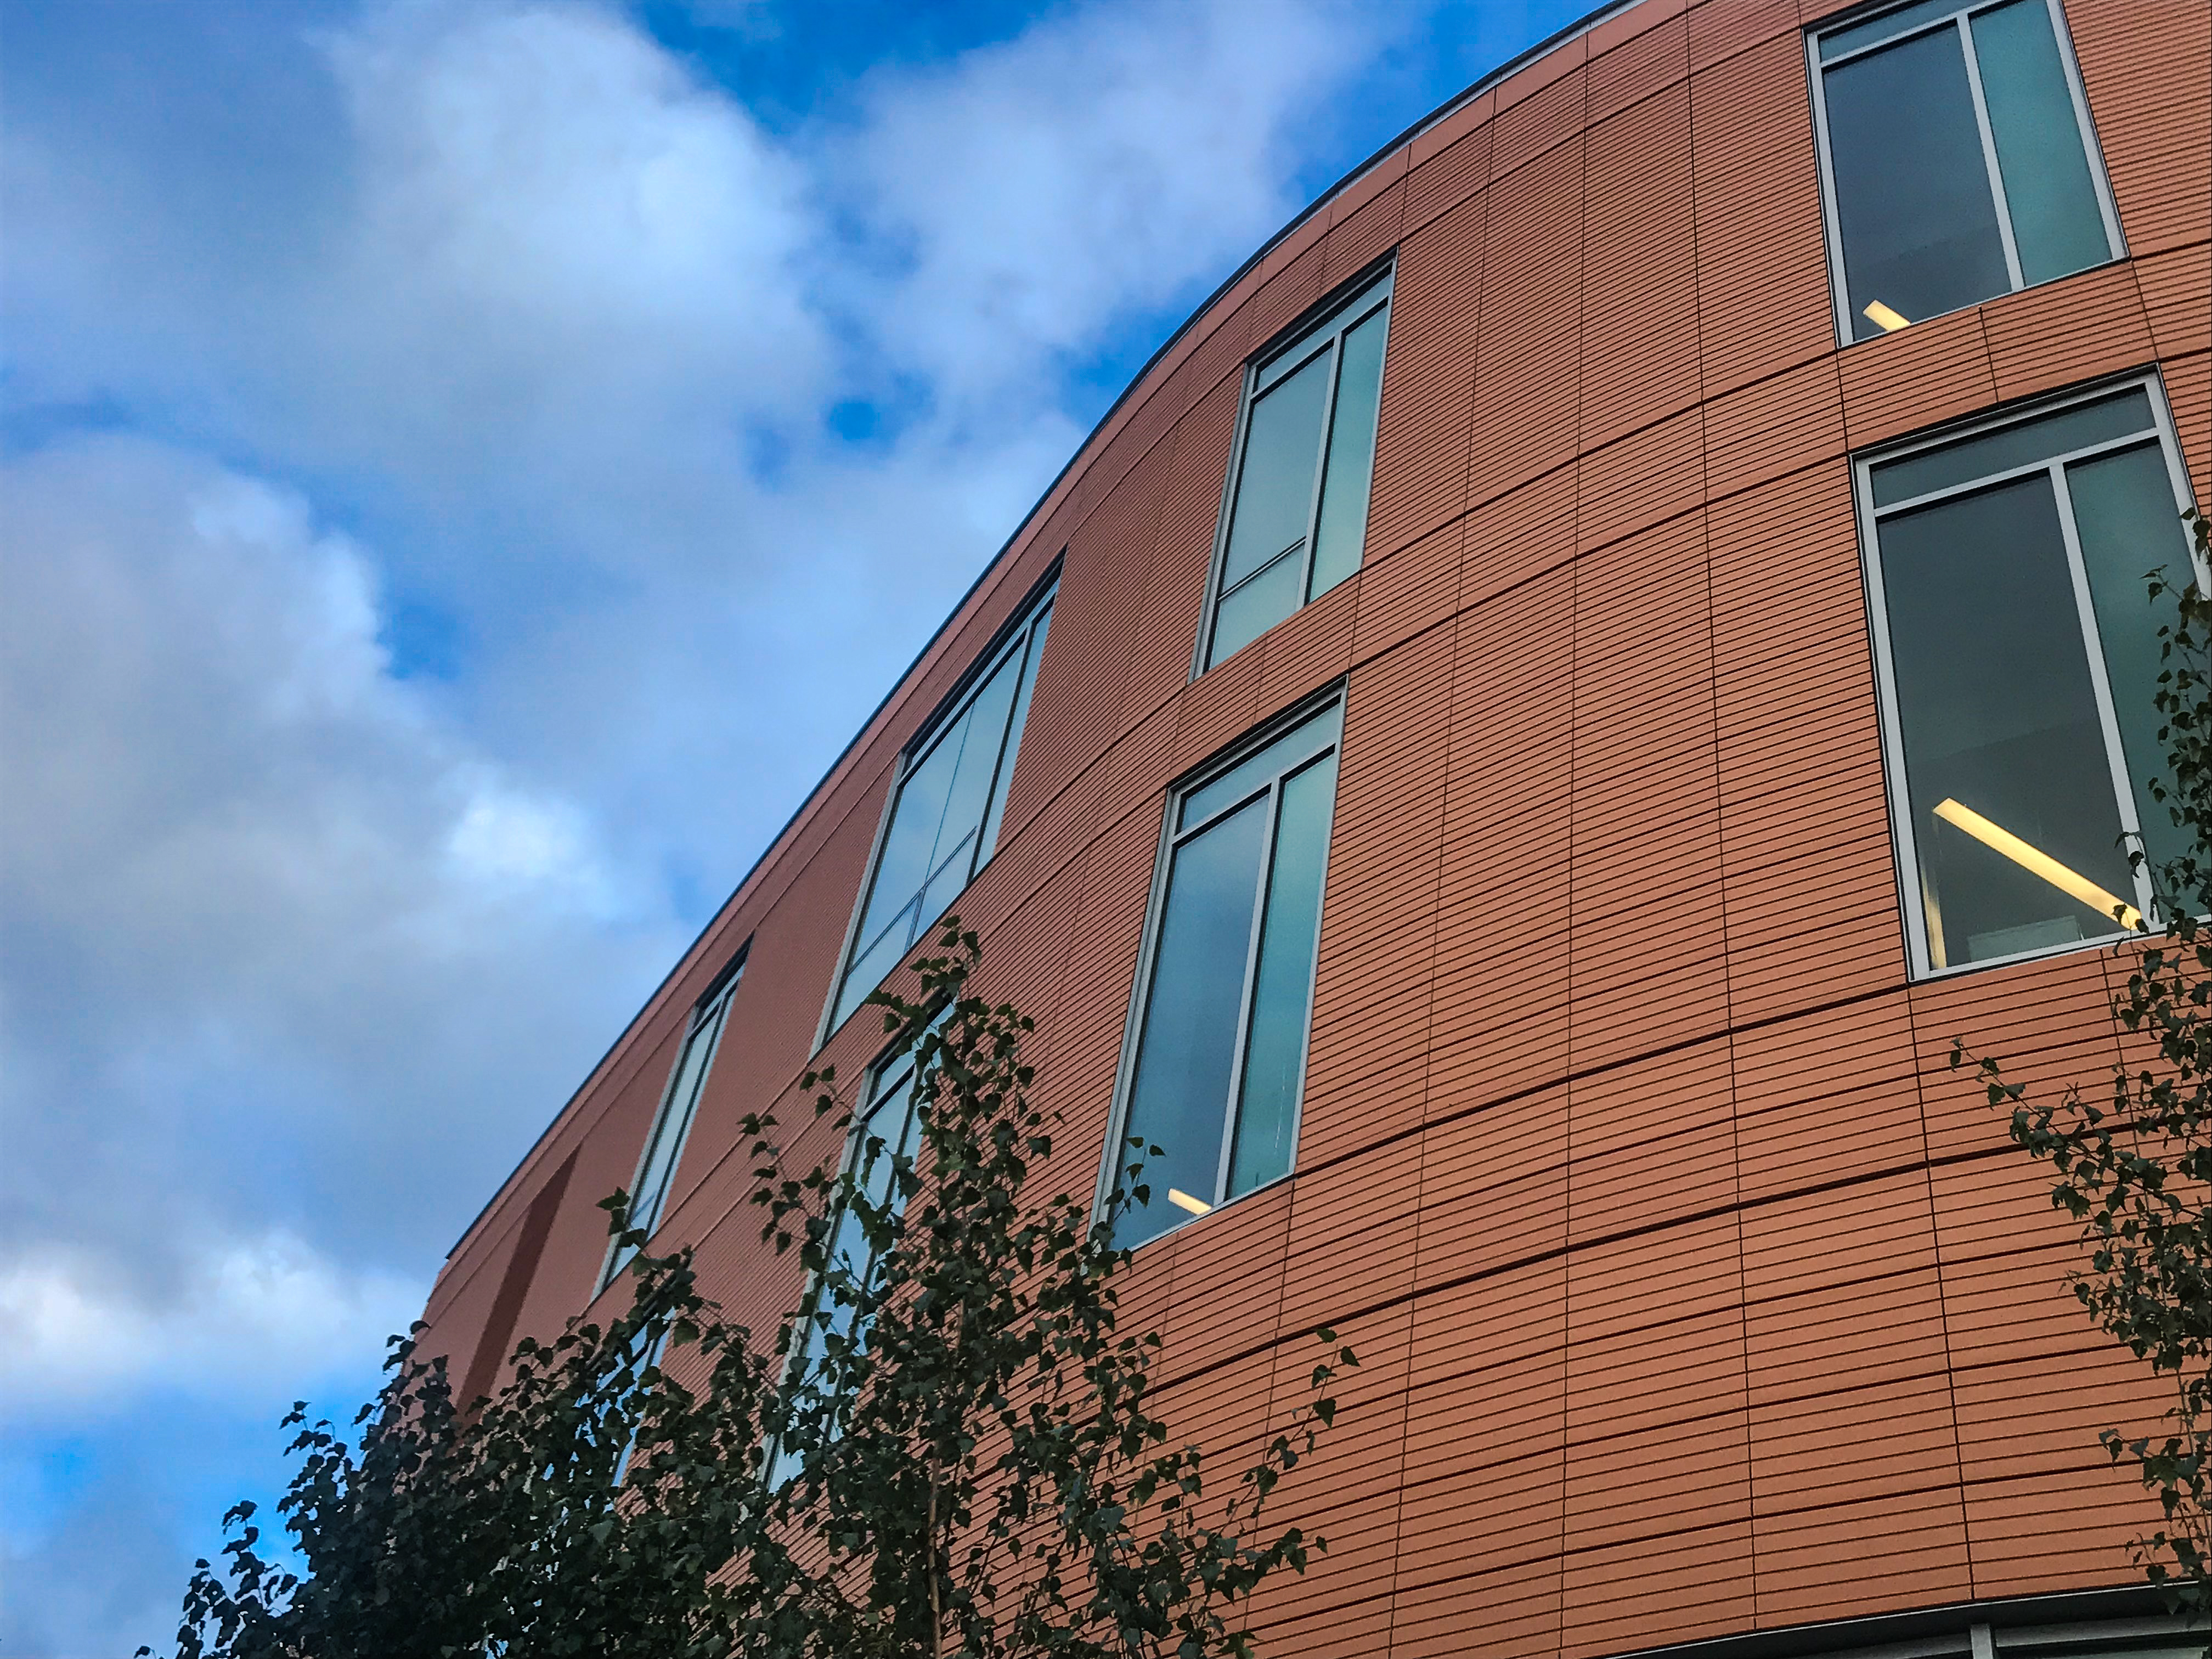 The standout façade features glass with profiled NBK terracotta panels in natural shades of an orange-red finish.